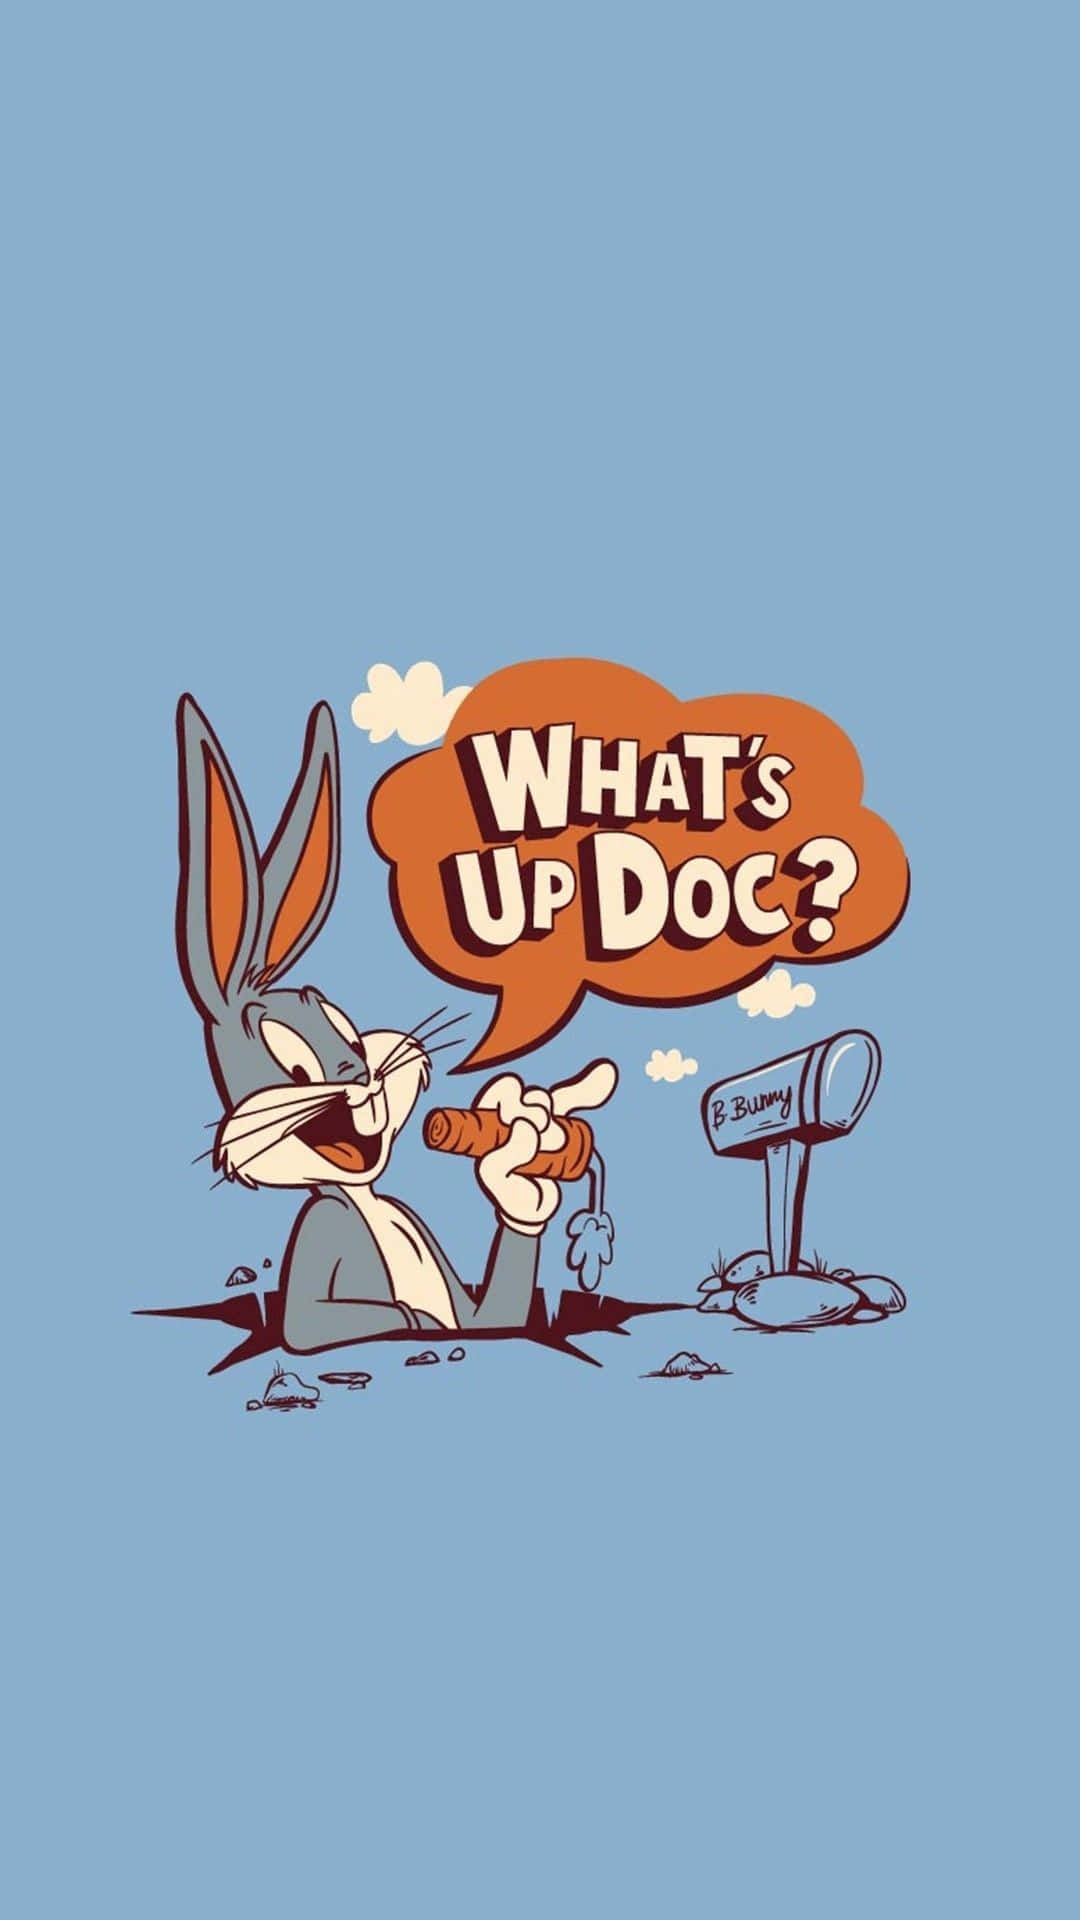 Free Bugs Bunny Iphone Wallpaper Downloads, [100+] Bugs Bunny Iphone  Wallpapers for FREE 